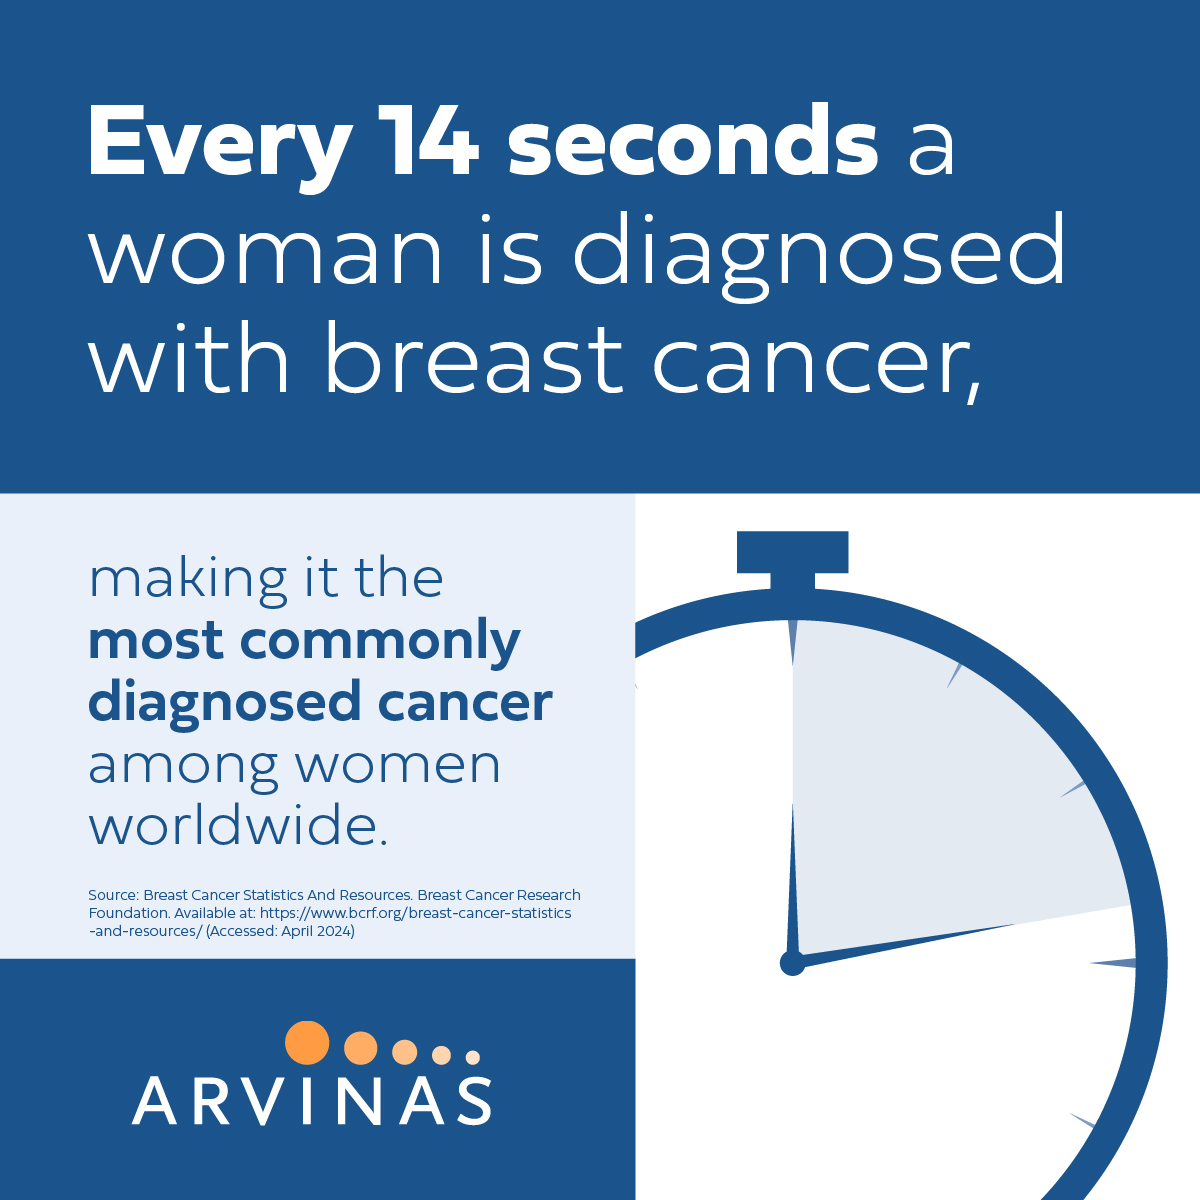 During #WomensHealthAwarenessMonth, we recognize the significant impact of breast cancer on women globally & remain committed to investigating innovative treatment options for those living with this disease. Find more info & resources about breast cancer: bit.ly/3Q8flys